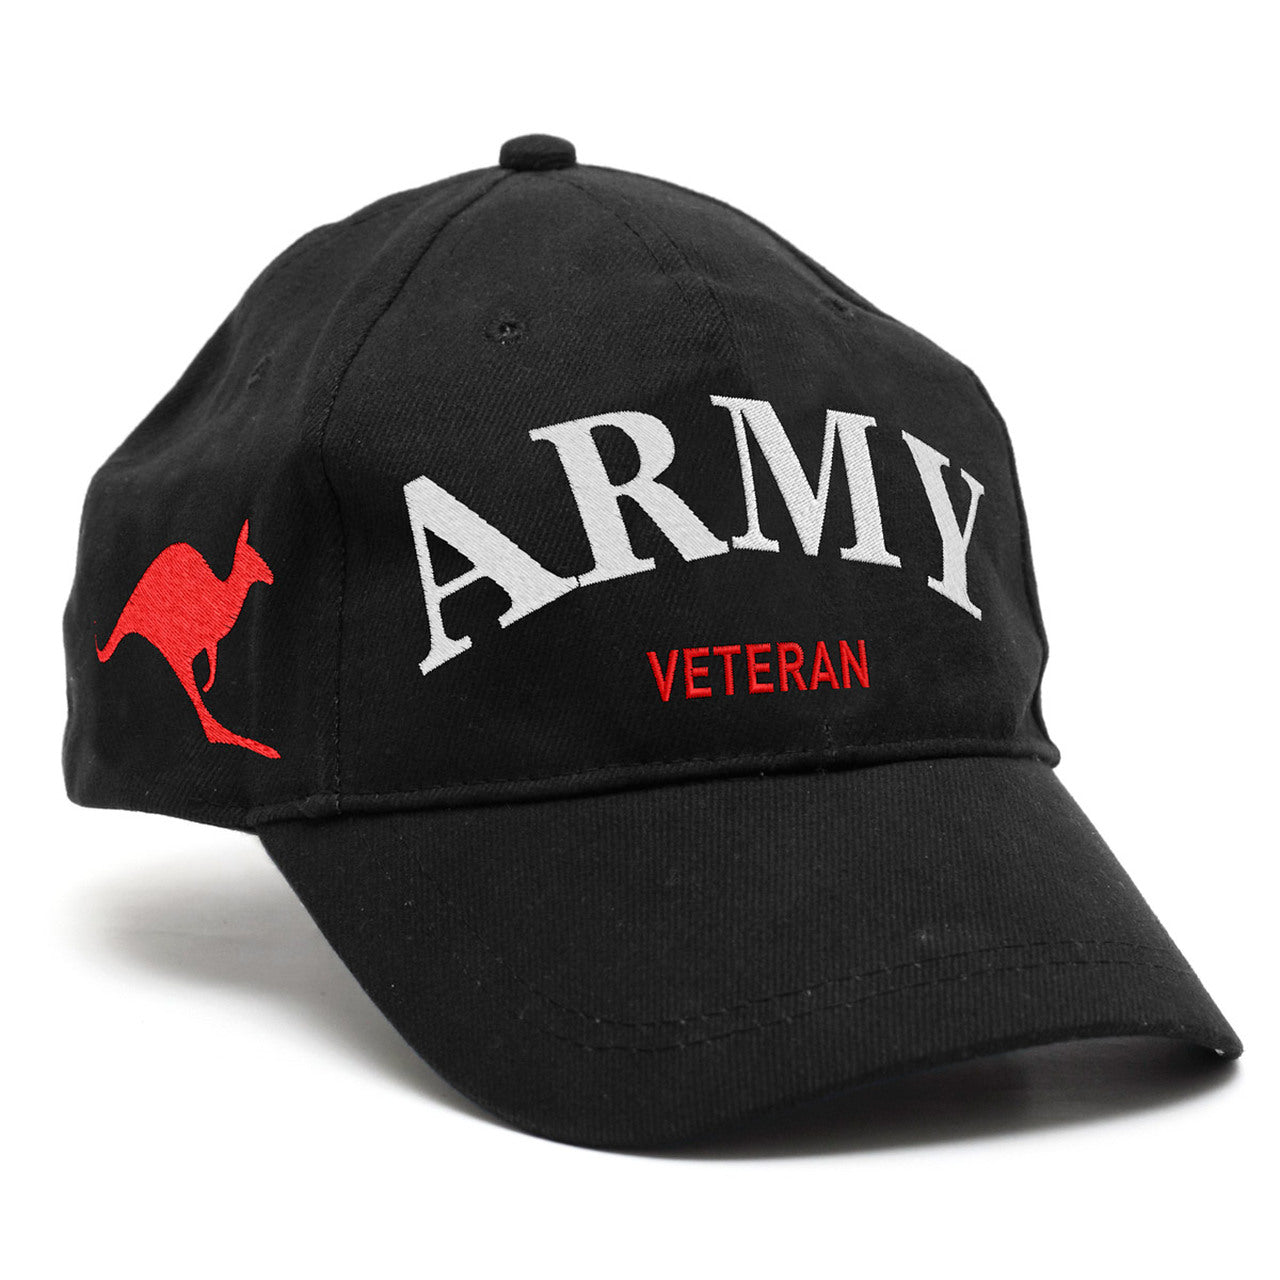 Perfect cap for Army Veterans, this quality heavy brushed cotton cap proudly displays your service to Australia